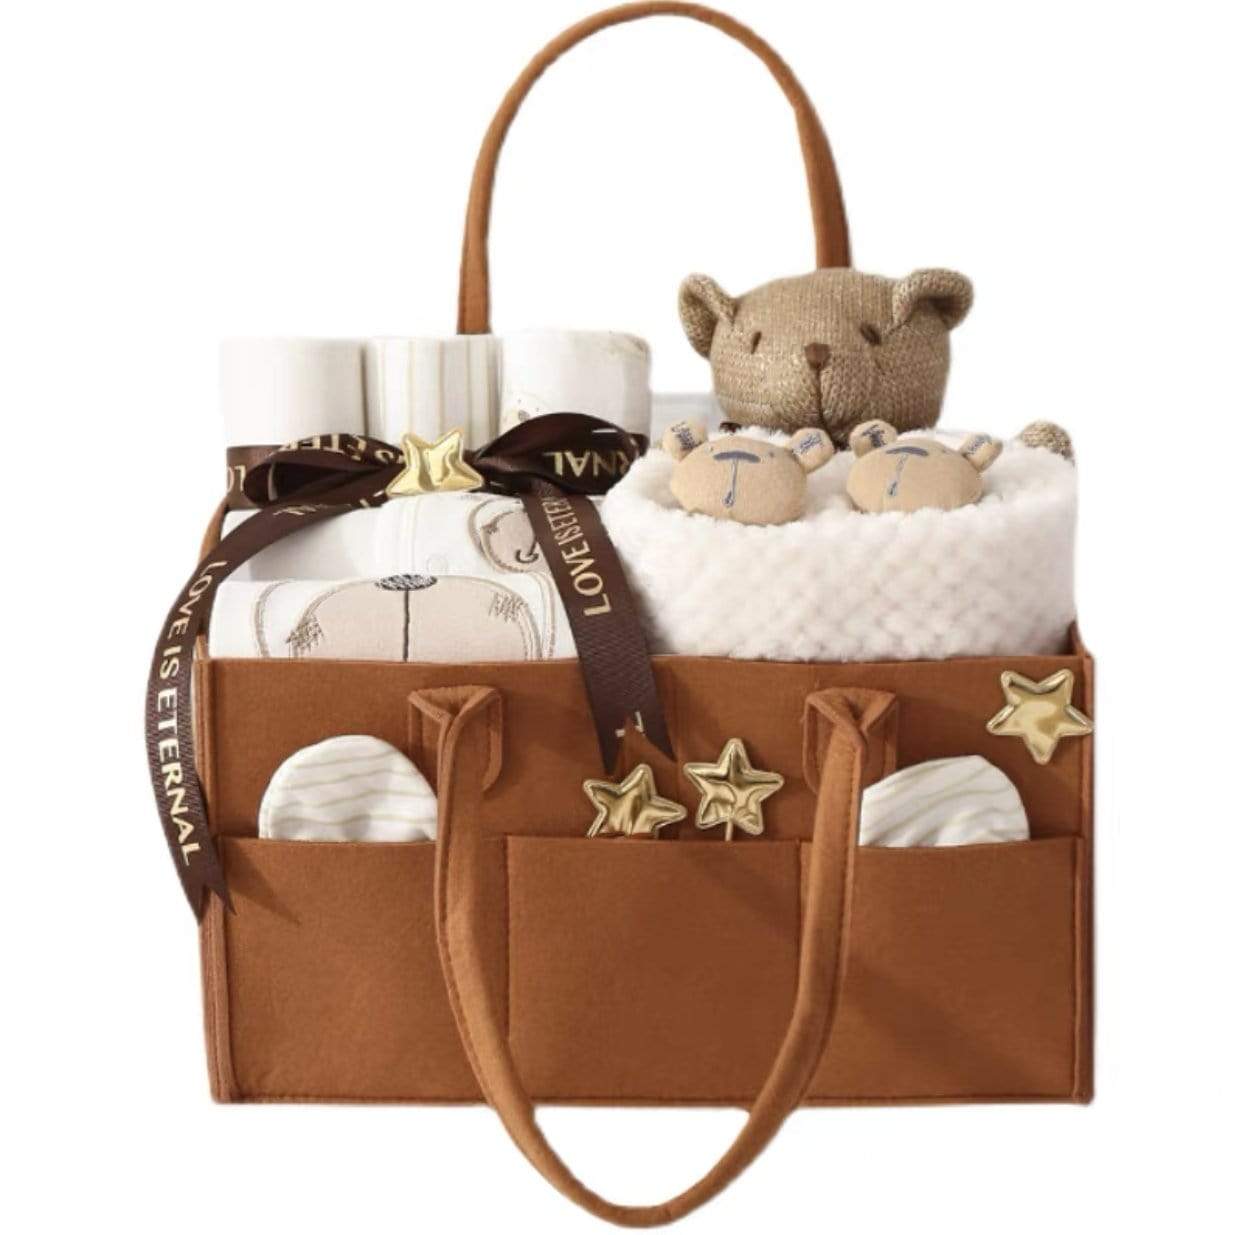 HELMS STORE Baby Gift Sets Lux Baby Shower 10 Pieces Gift Hamper - Brown